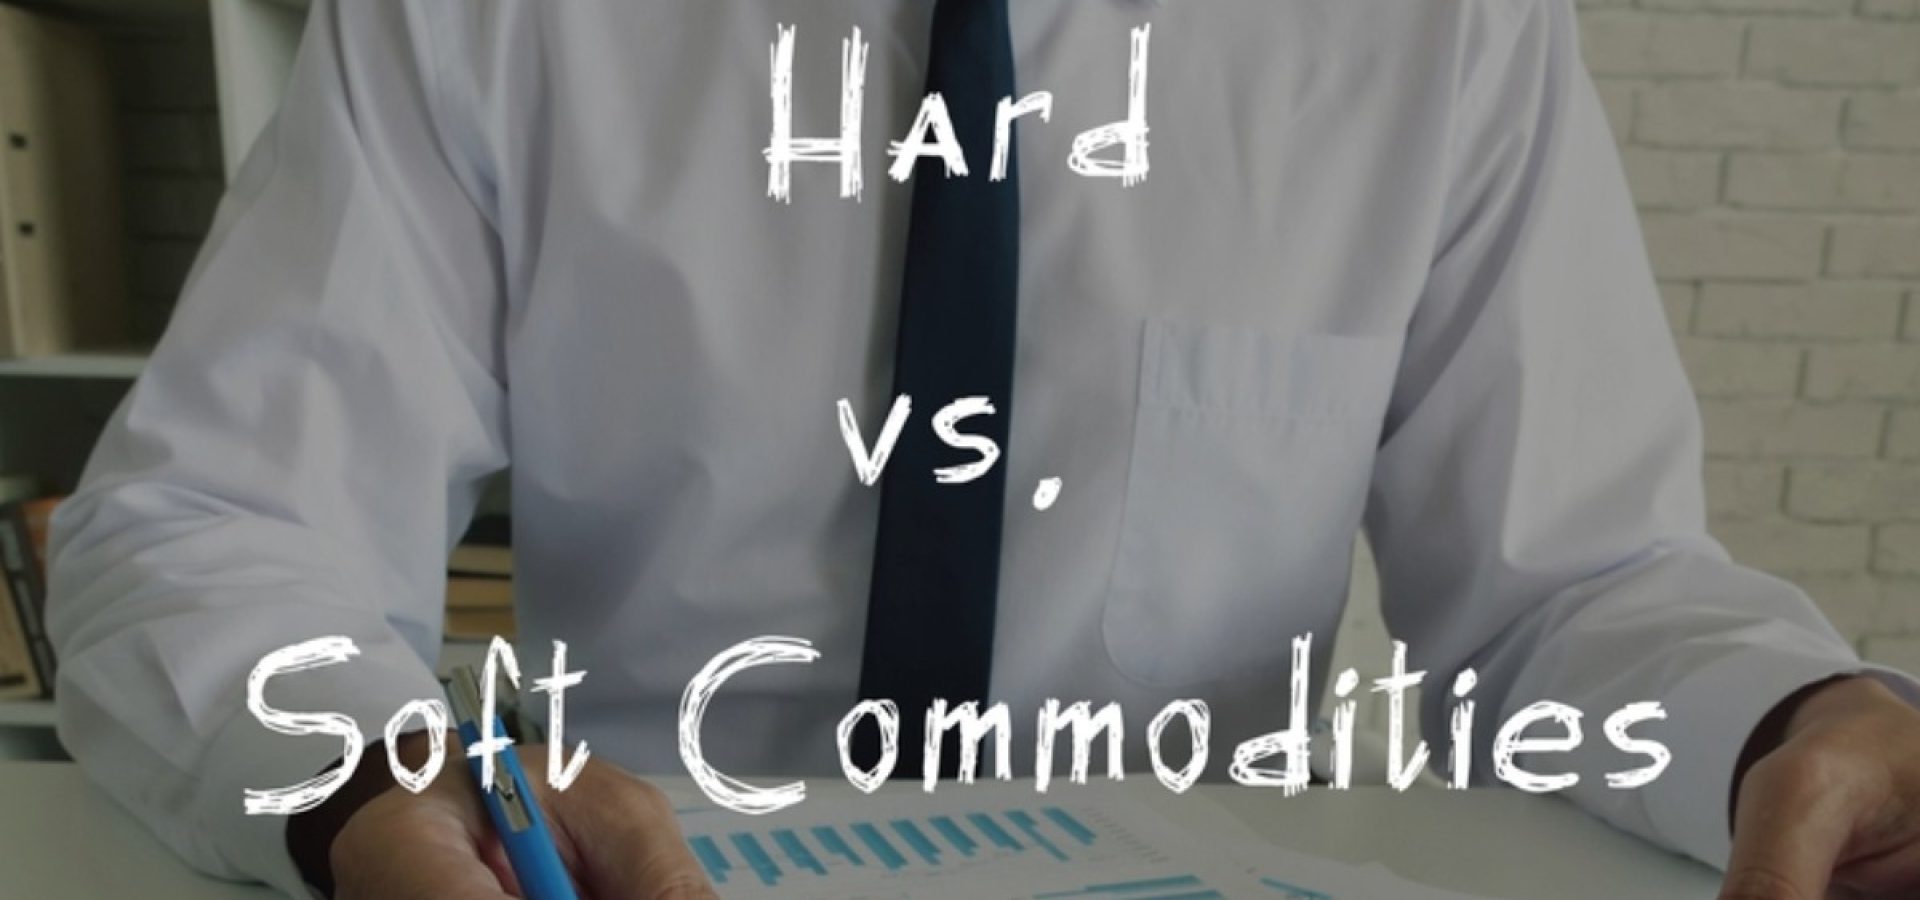 Hard commodities VS Soft commodities: Differences